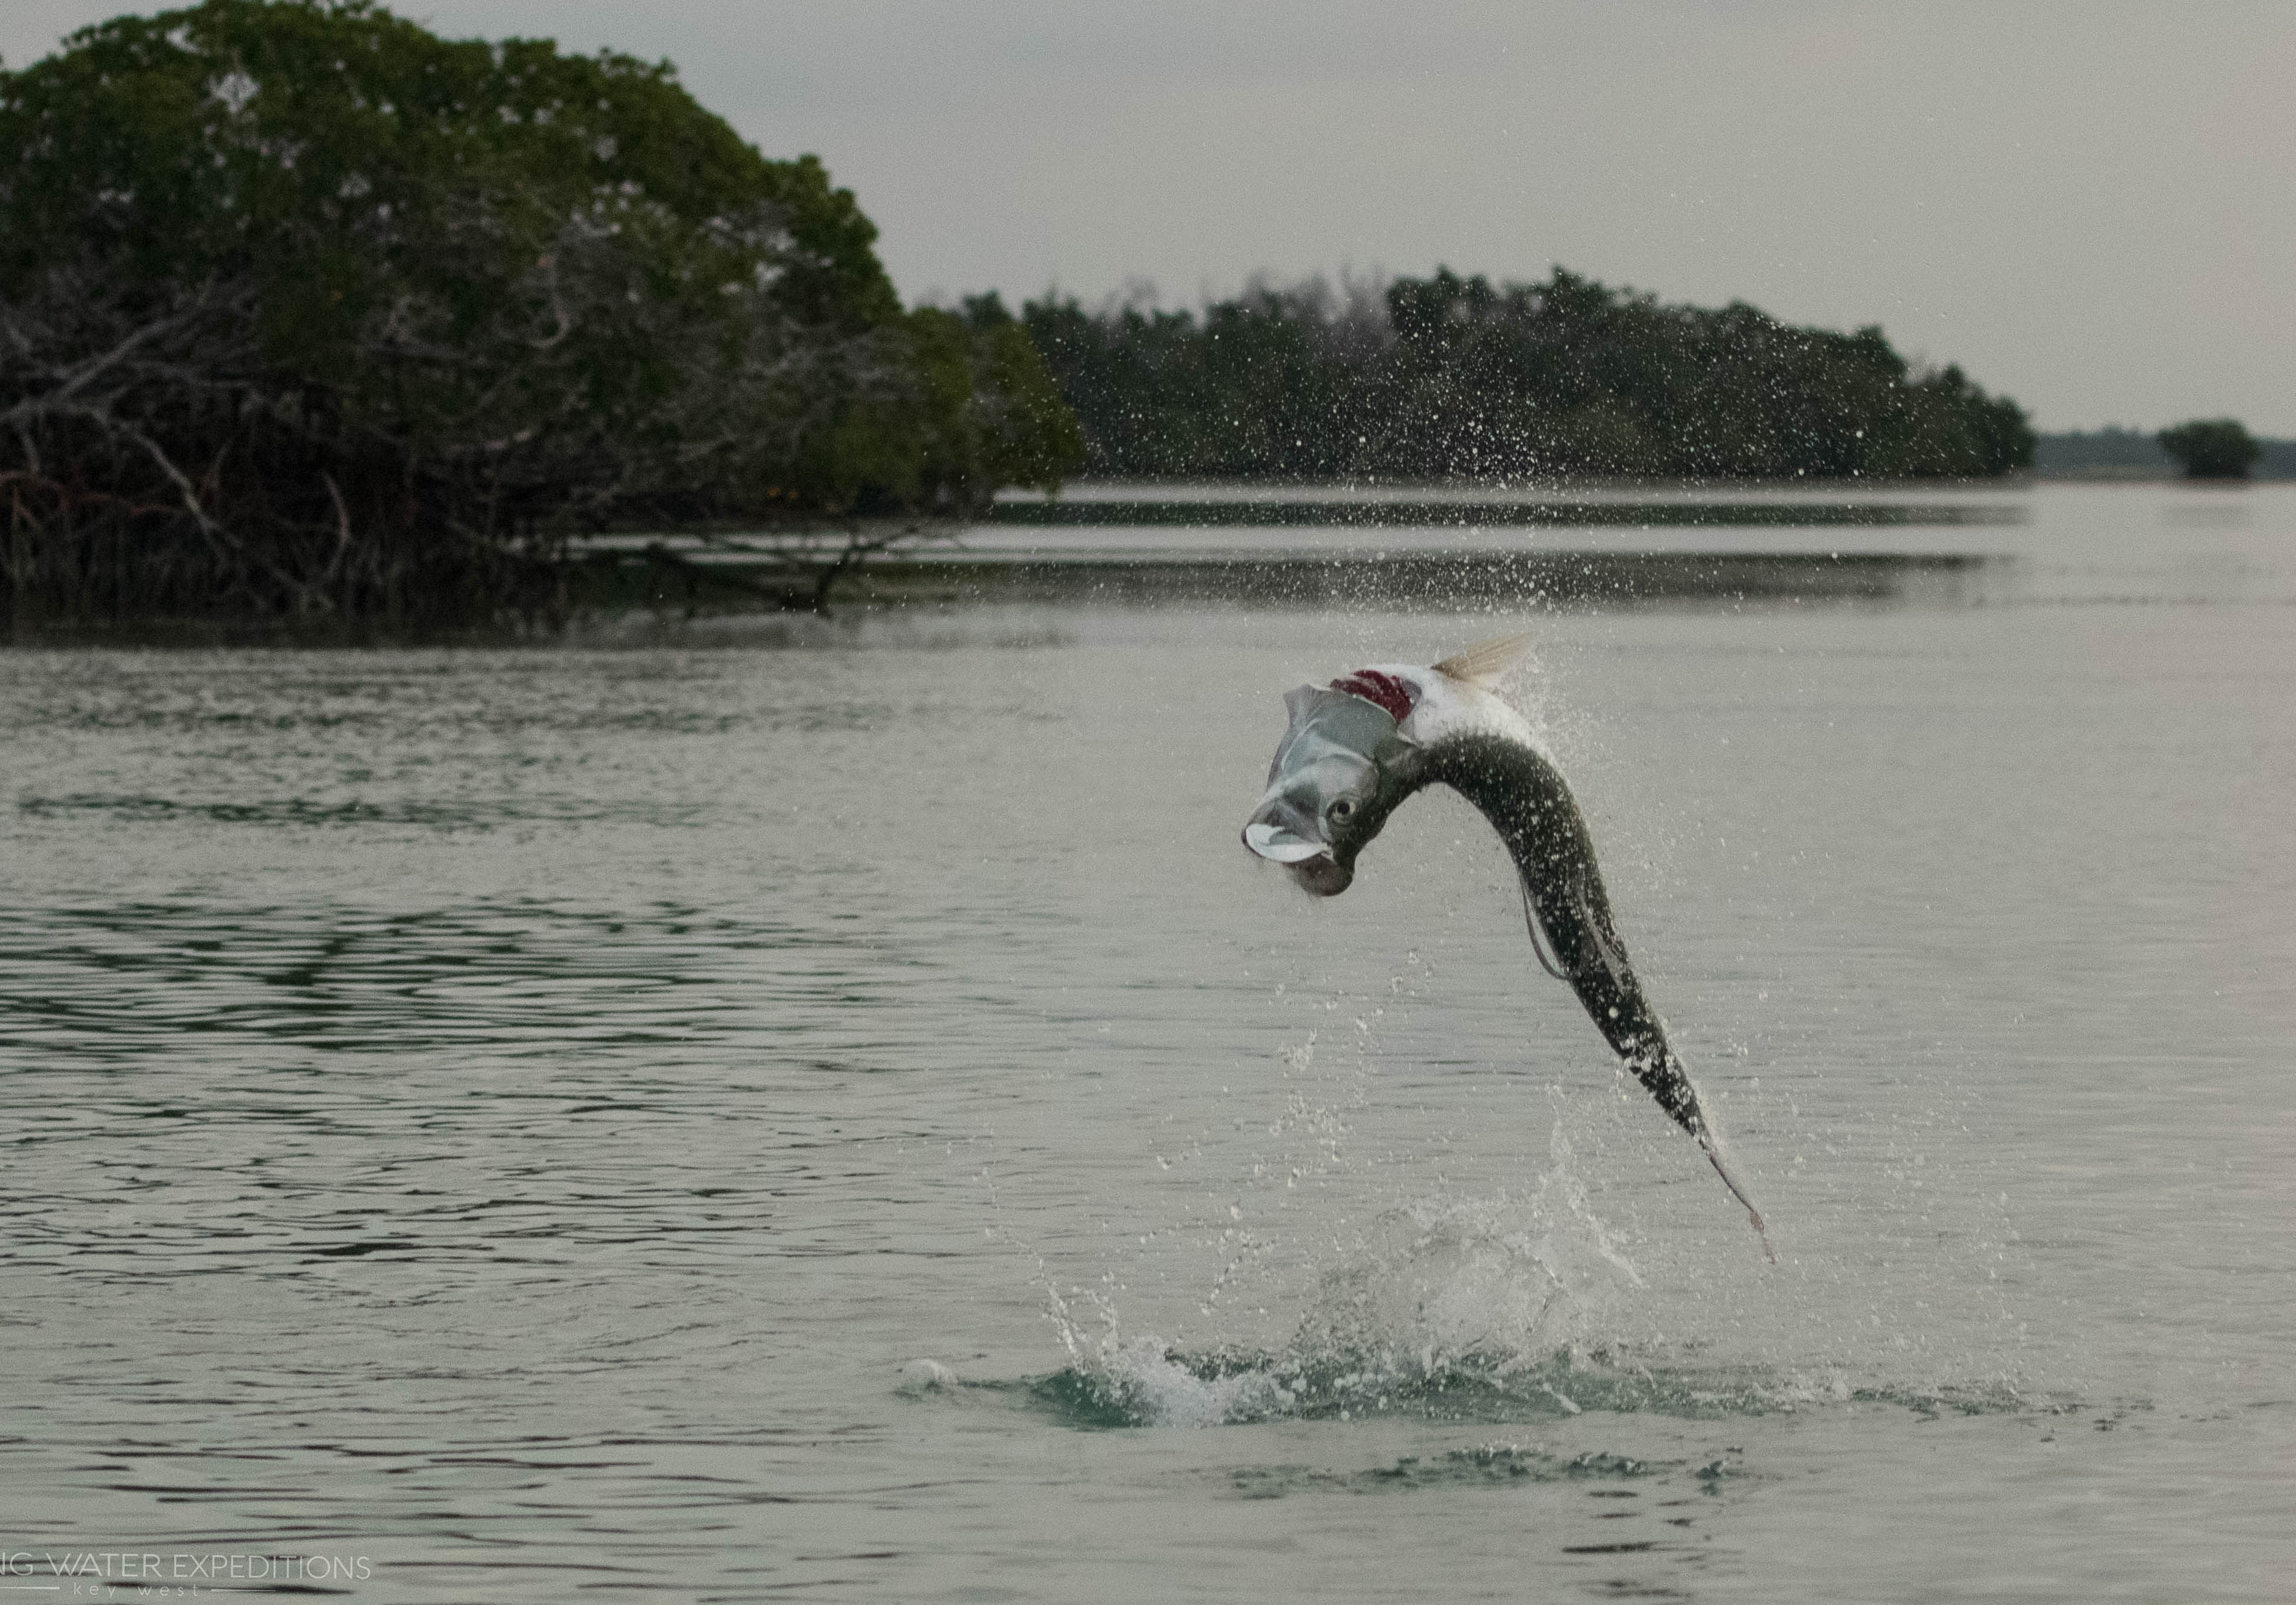 Here is a nice tarpon jumping in the backcountry off of Key West